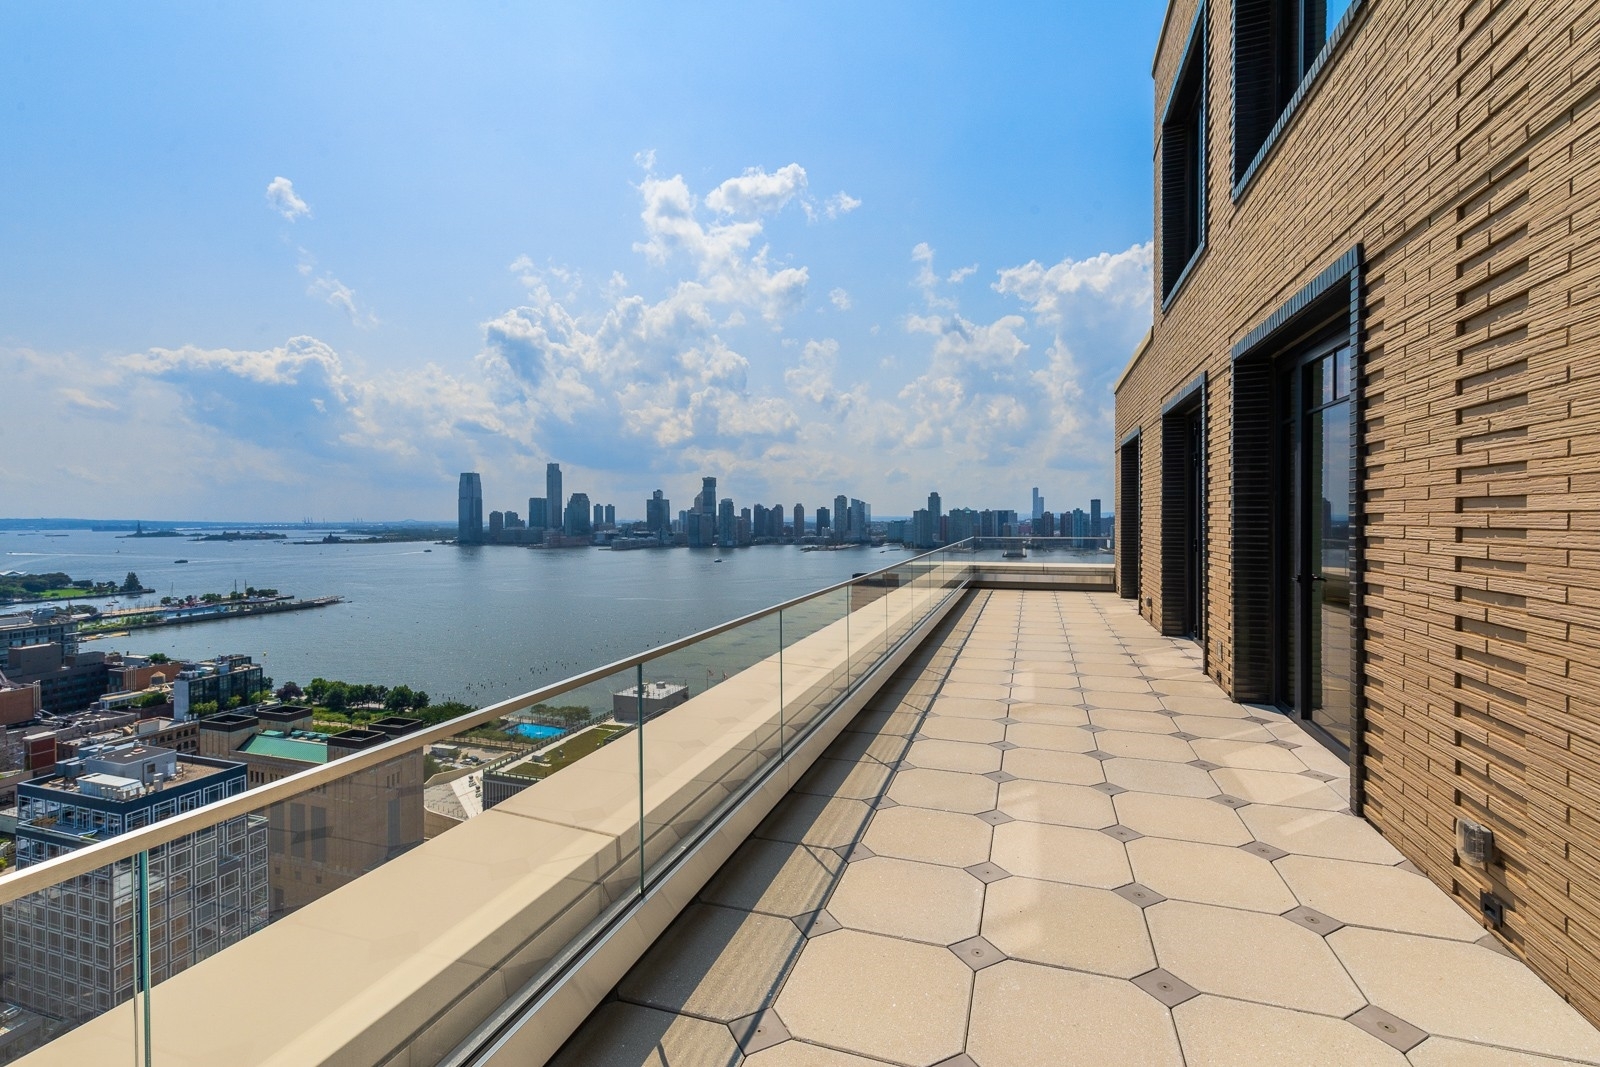 Property at Greenwich West, 110 CHARLTON ST, PH29A Hudson Square, New York, NY 10014